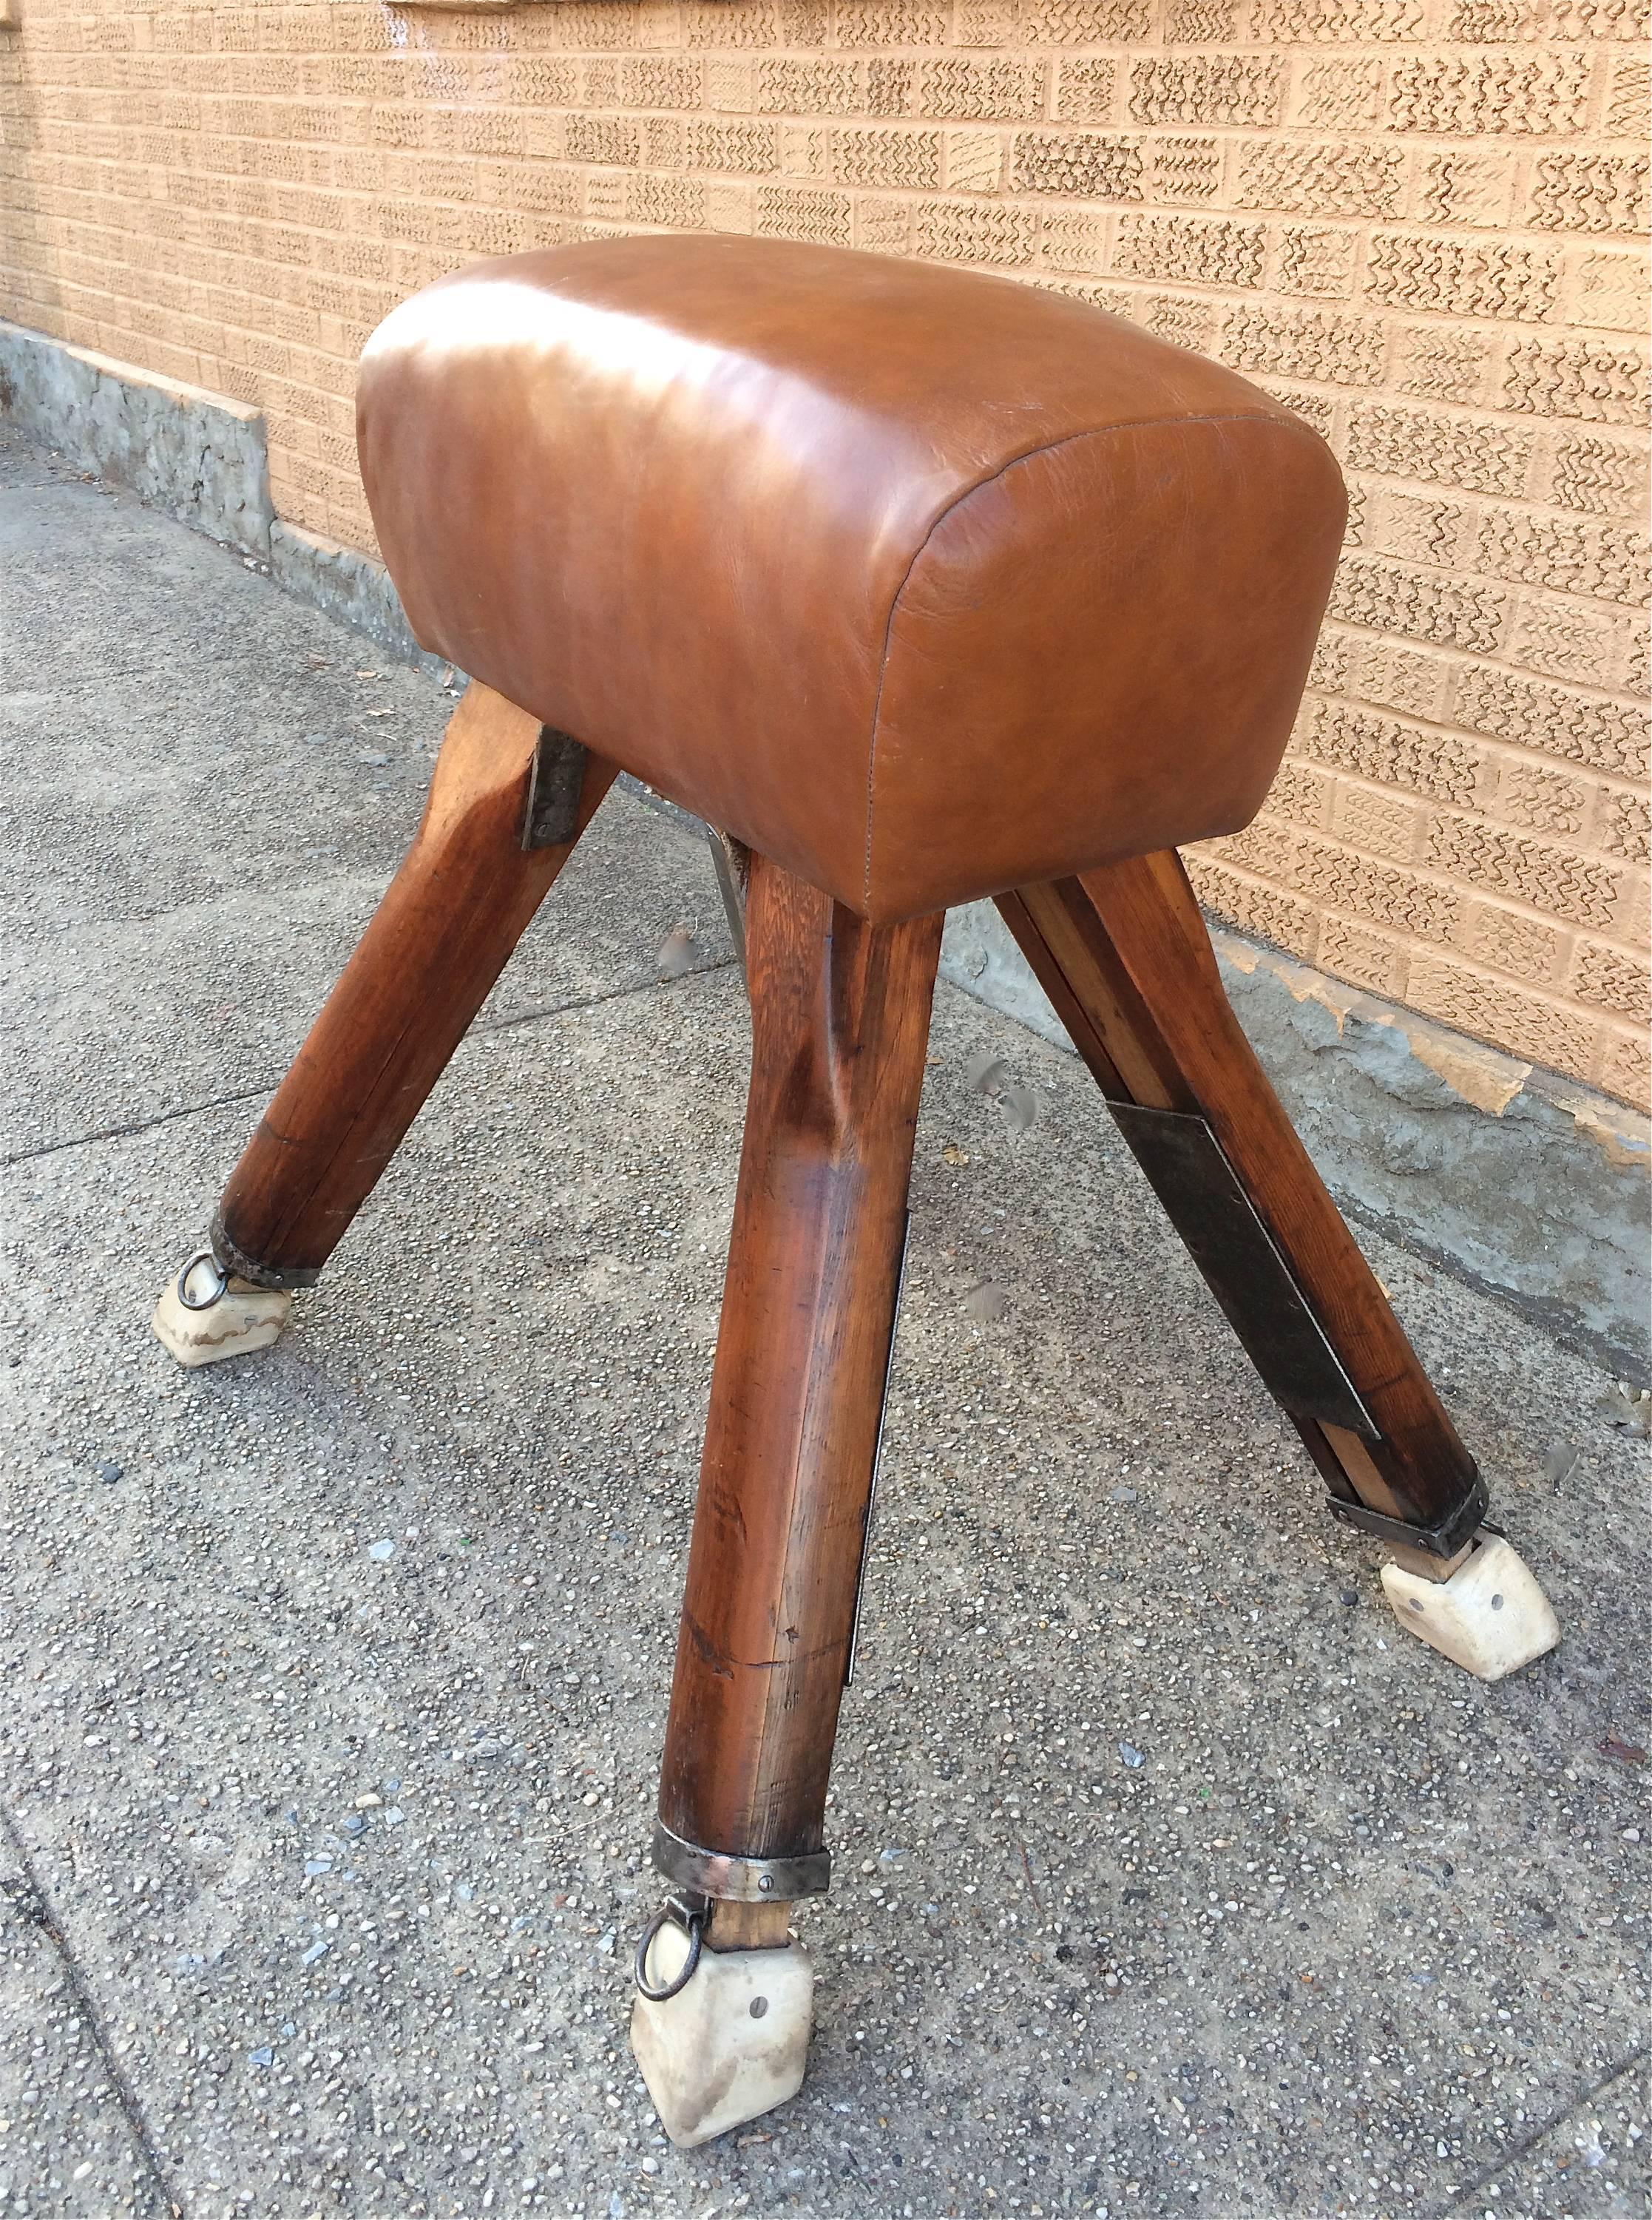 1940s, vaulting pommel horse with newly upholstered tan leather seat and oak legs by Niels Larsen, Denmark.

Measures: 37.5